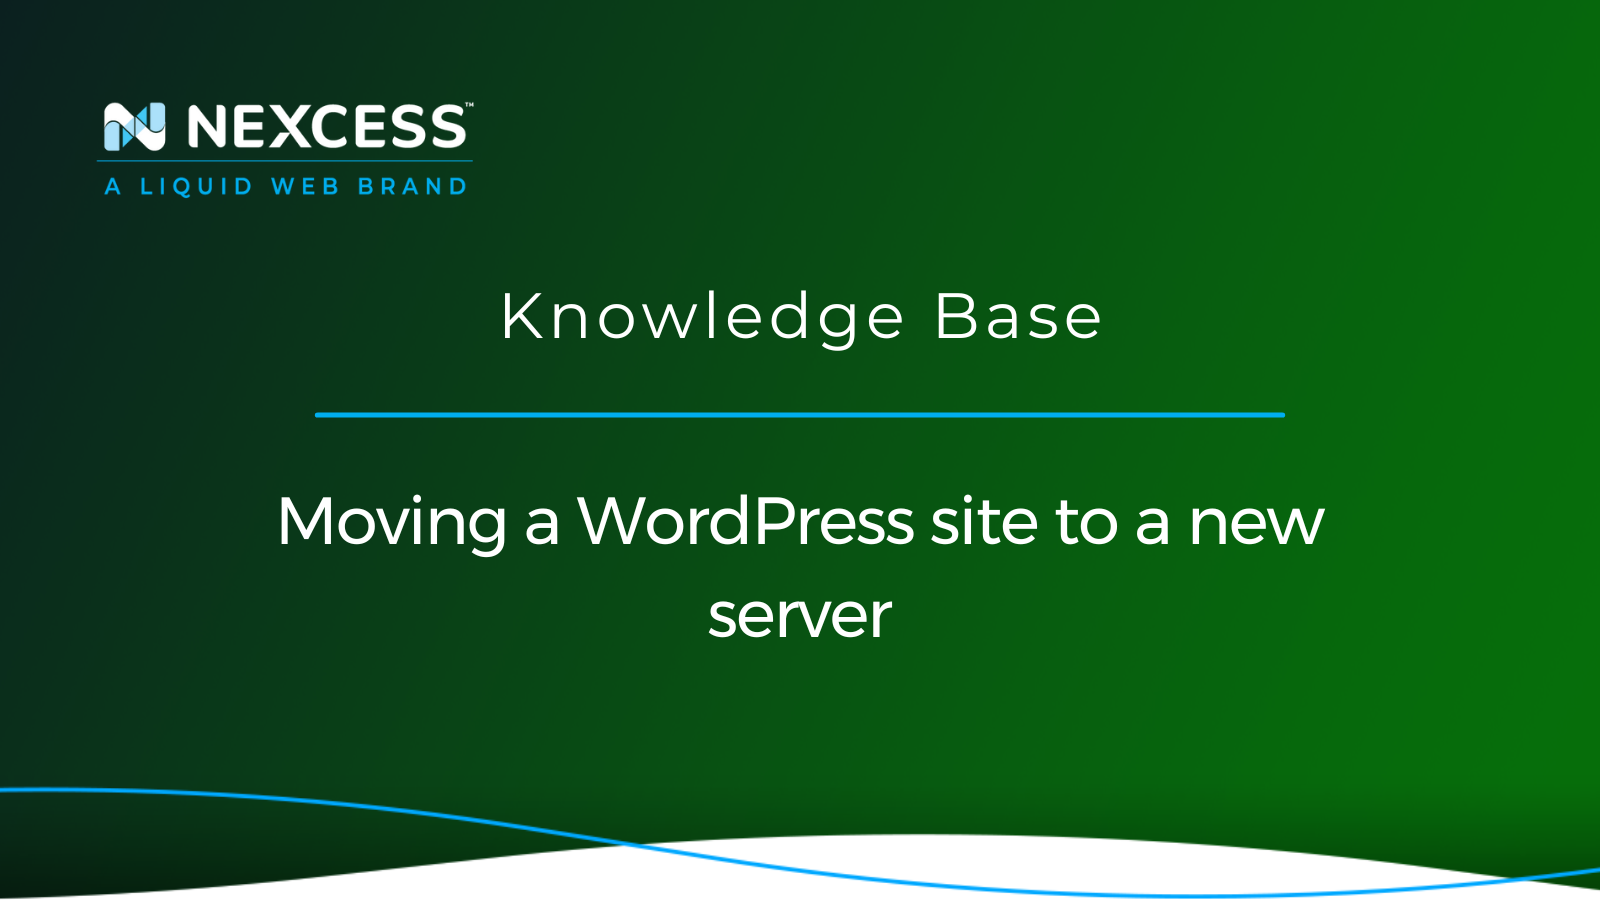 Moving a WordPress site to a new server